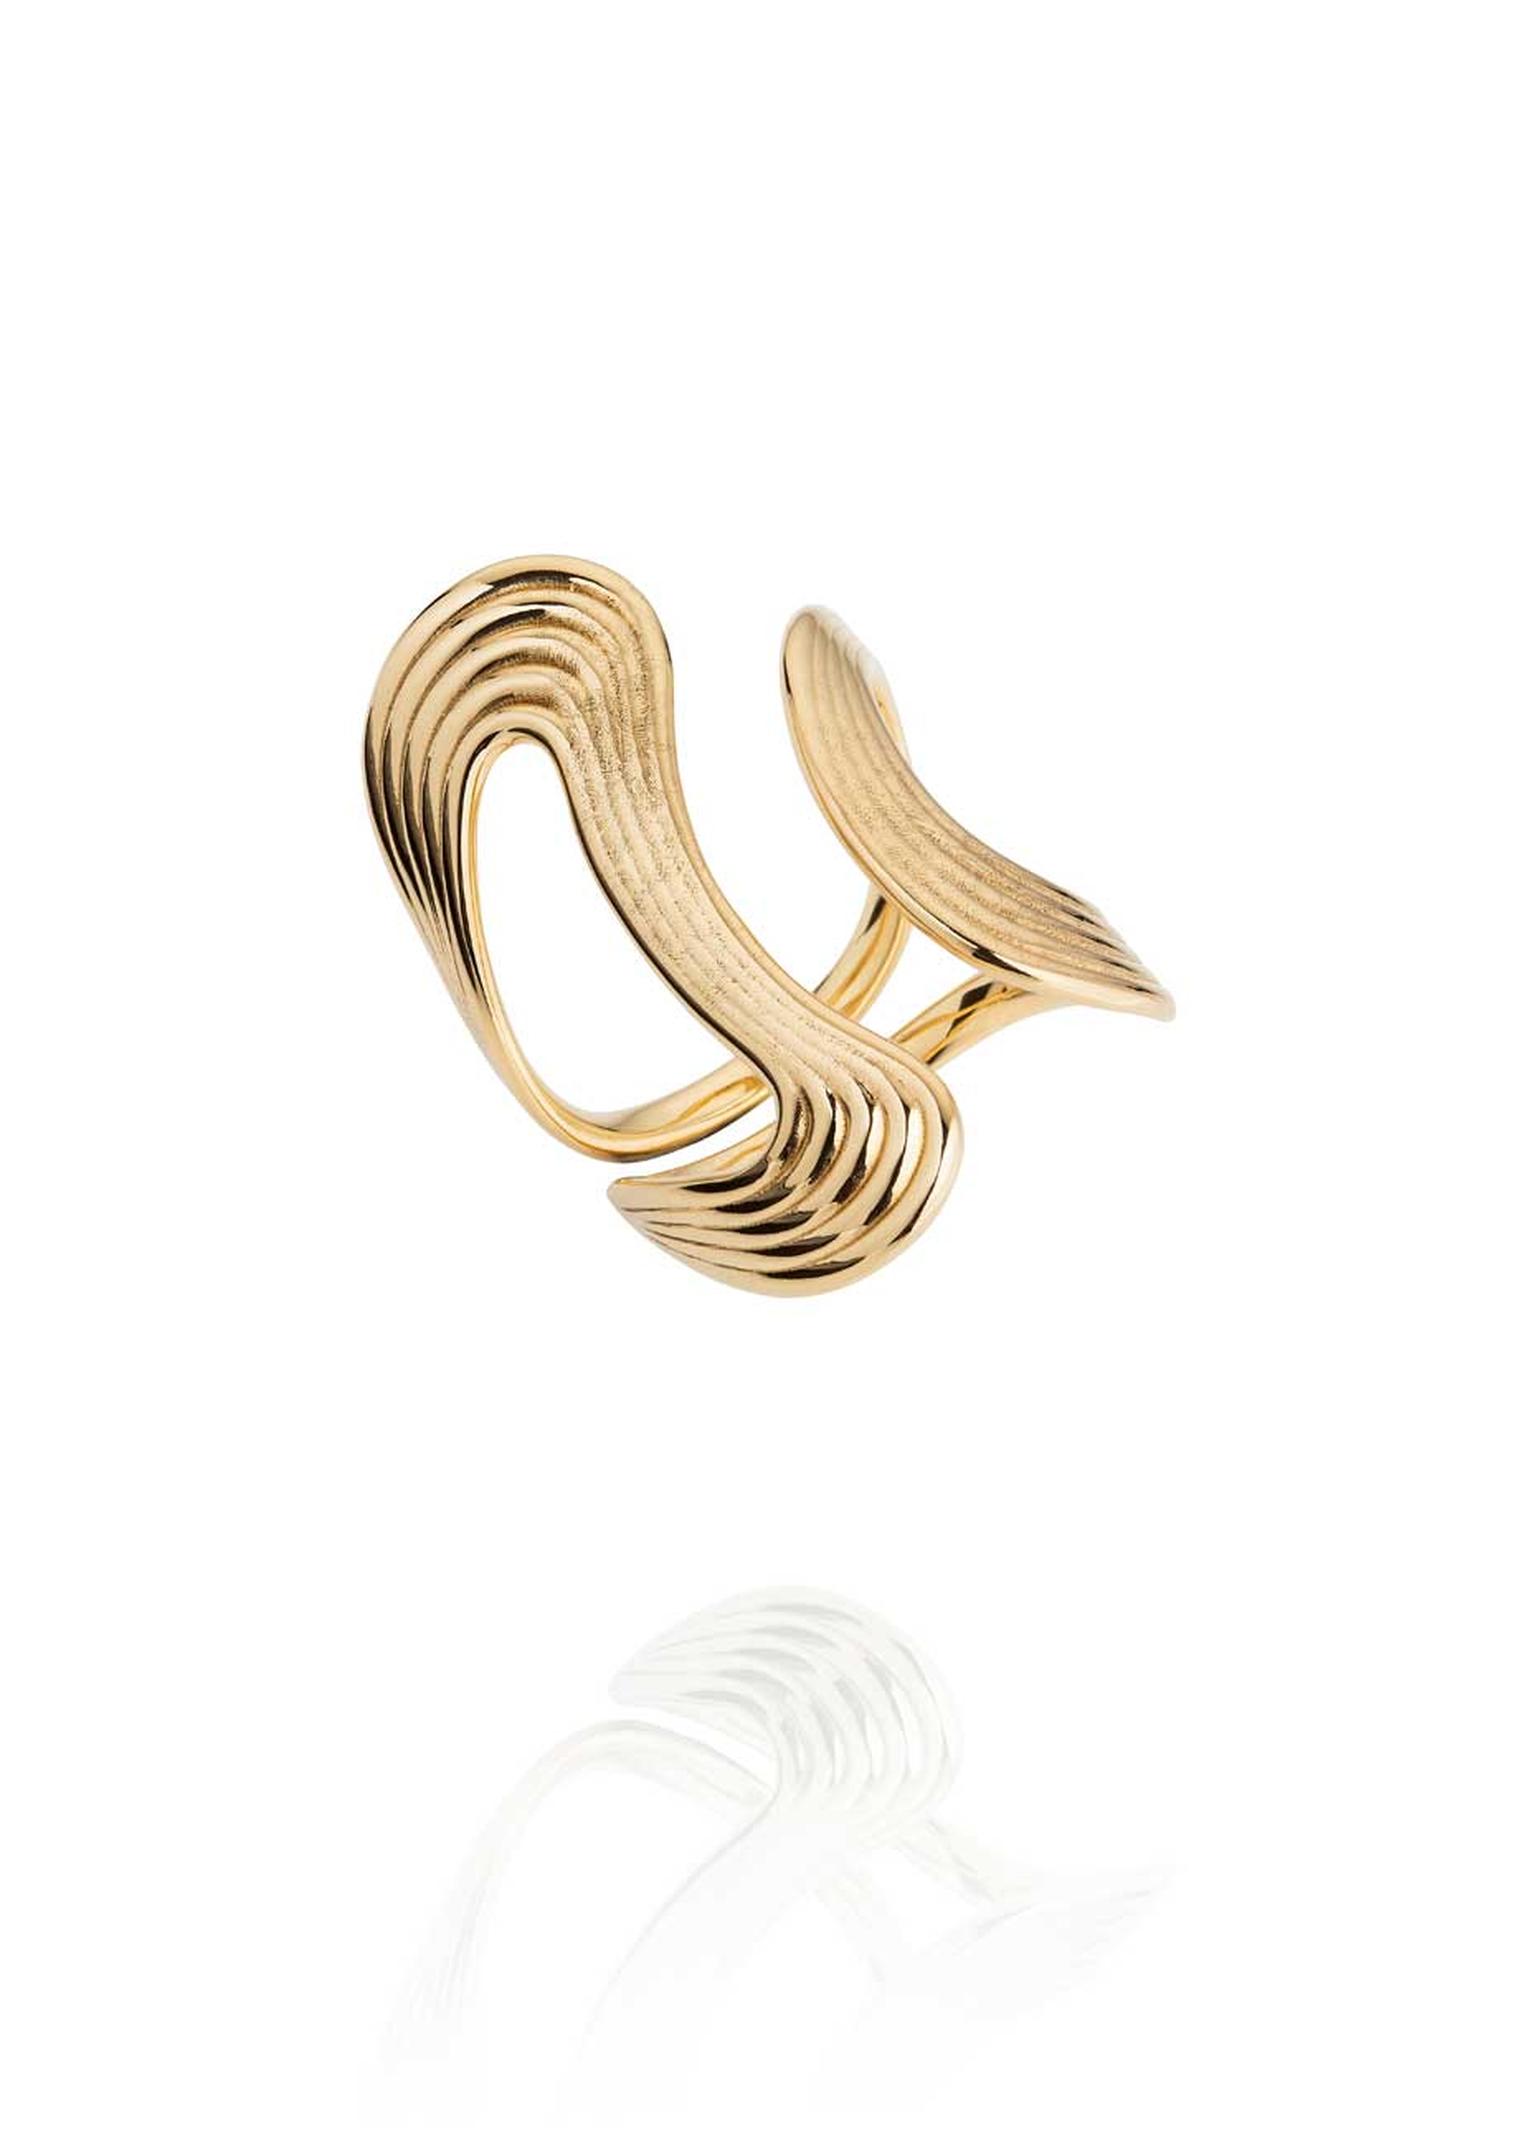 Stream Lines Open Ring in yellow gold from Fernando Jorge's new Stream Collection.